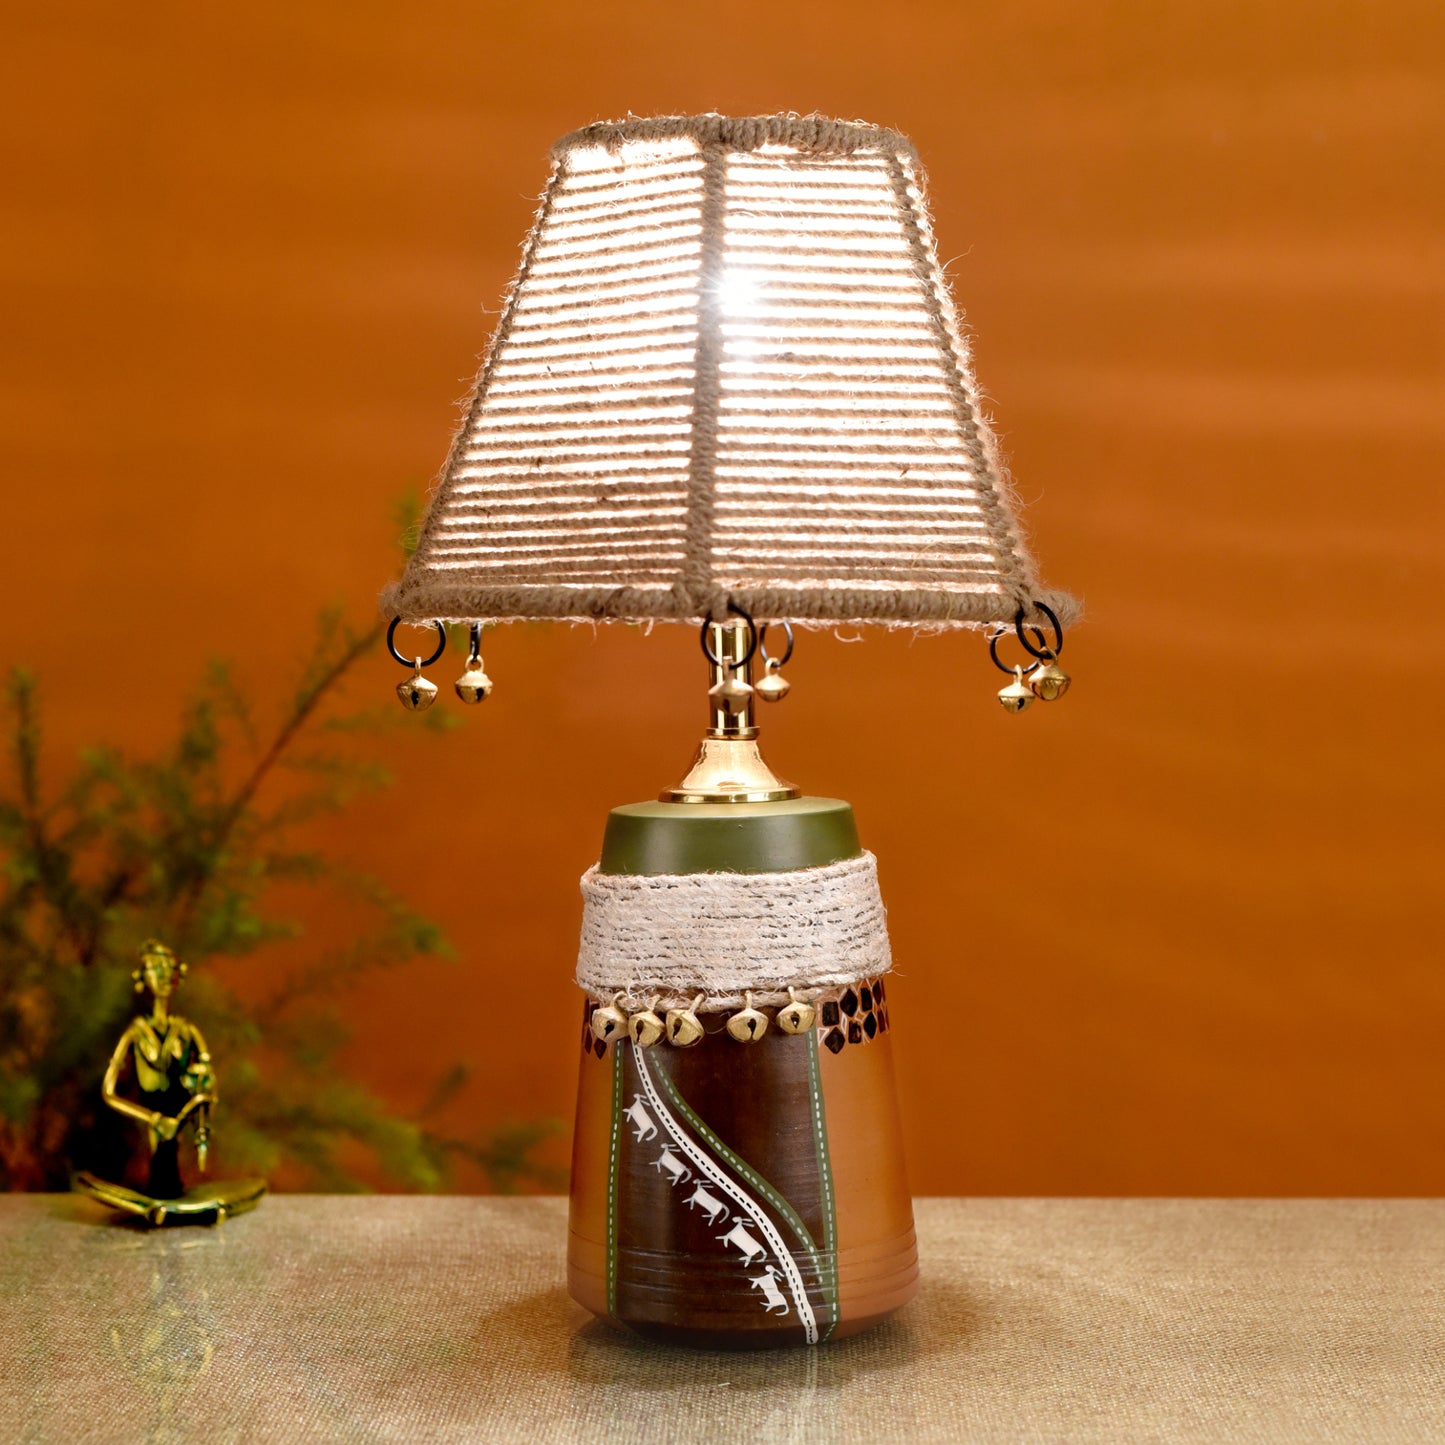 Hand Knitted Earthen Lamp with embellished Jute Shade (16x4.5")